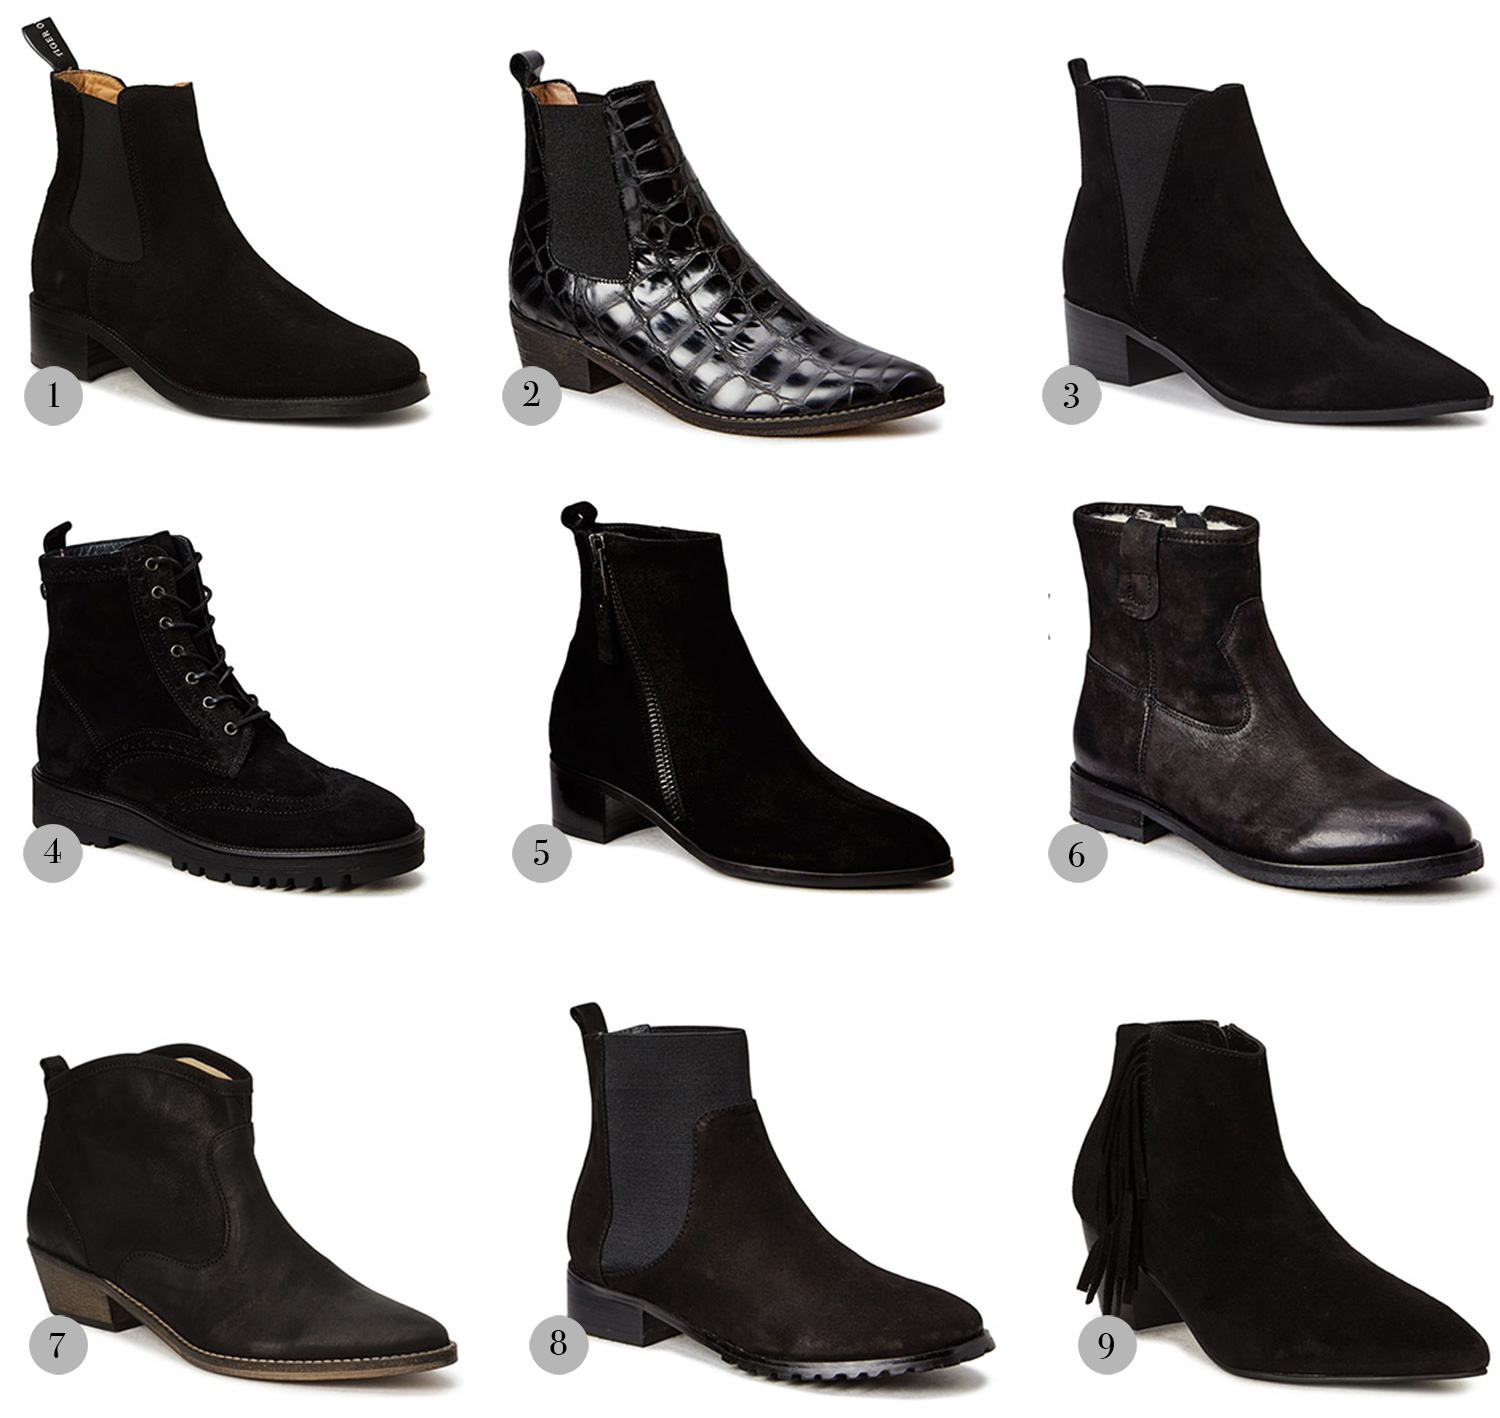 Ankle boots for everyday - Christina Dueholm